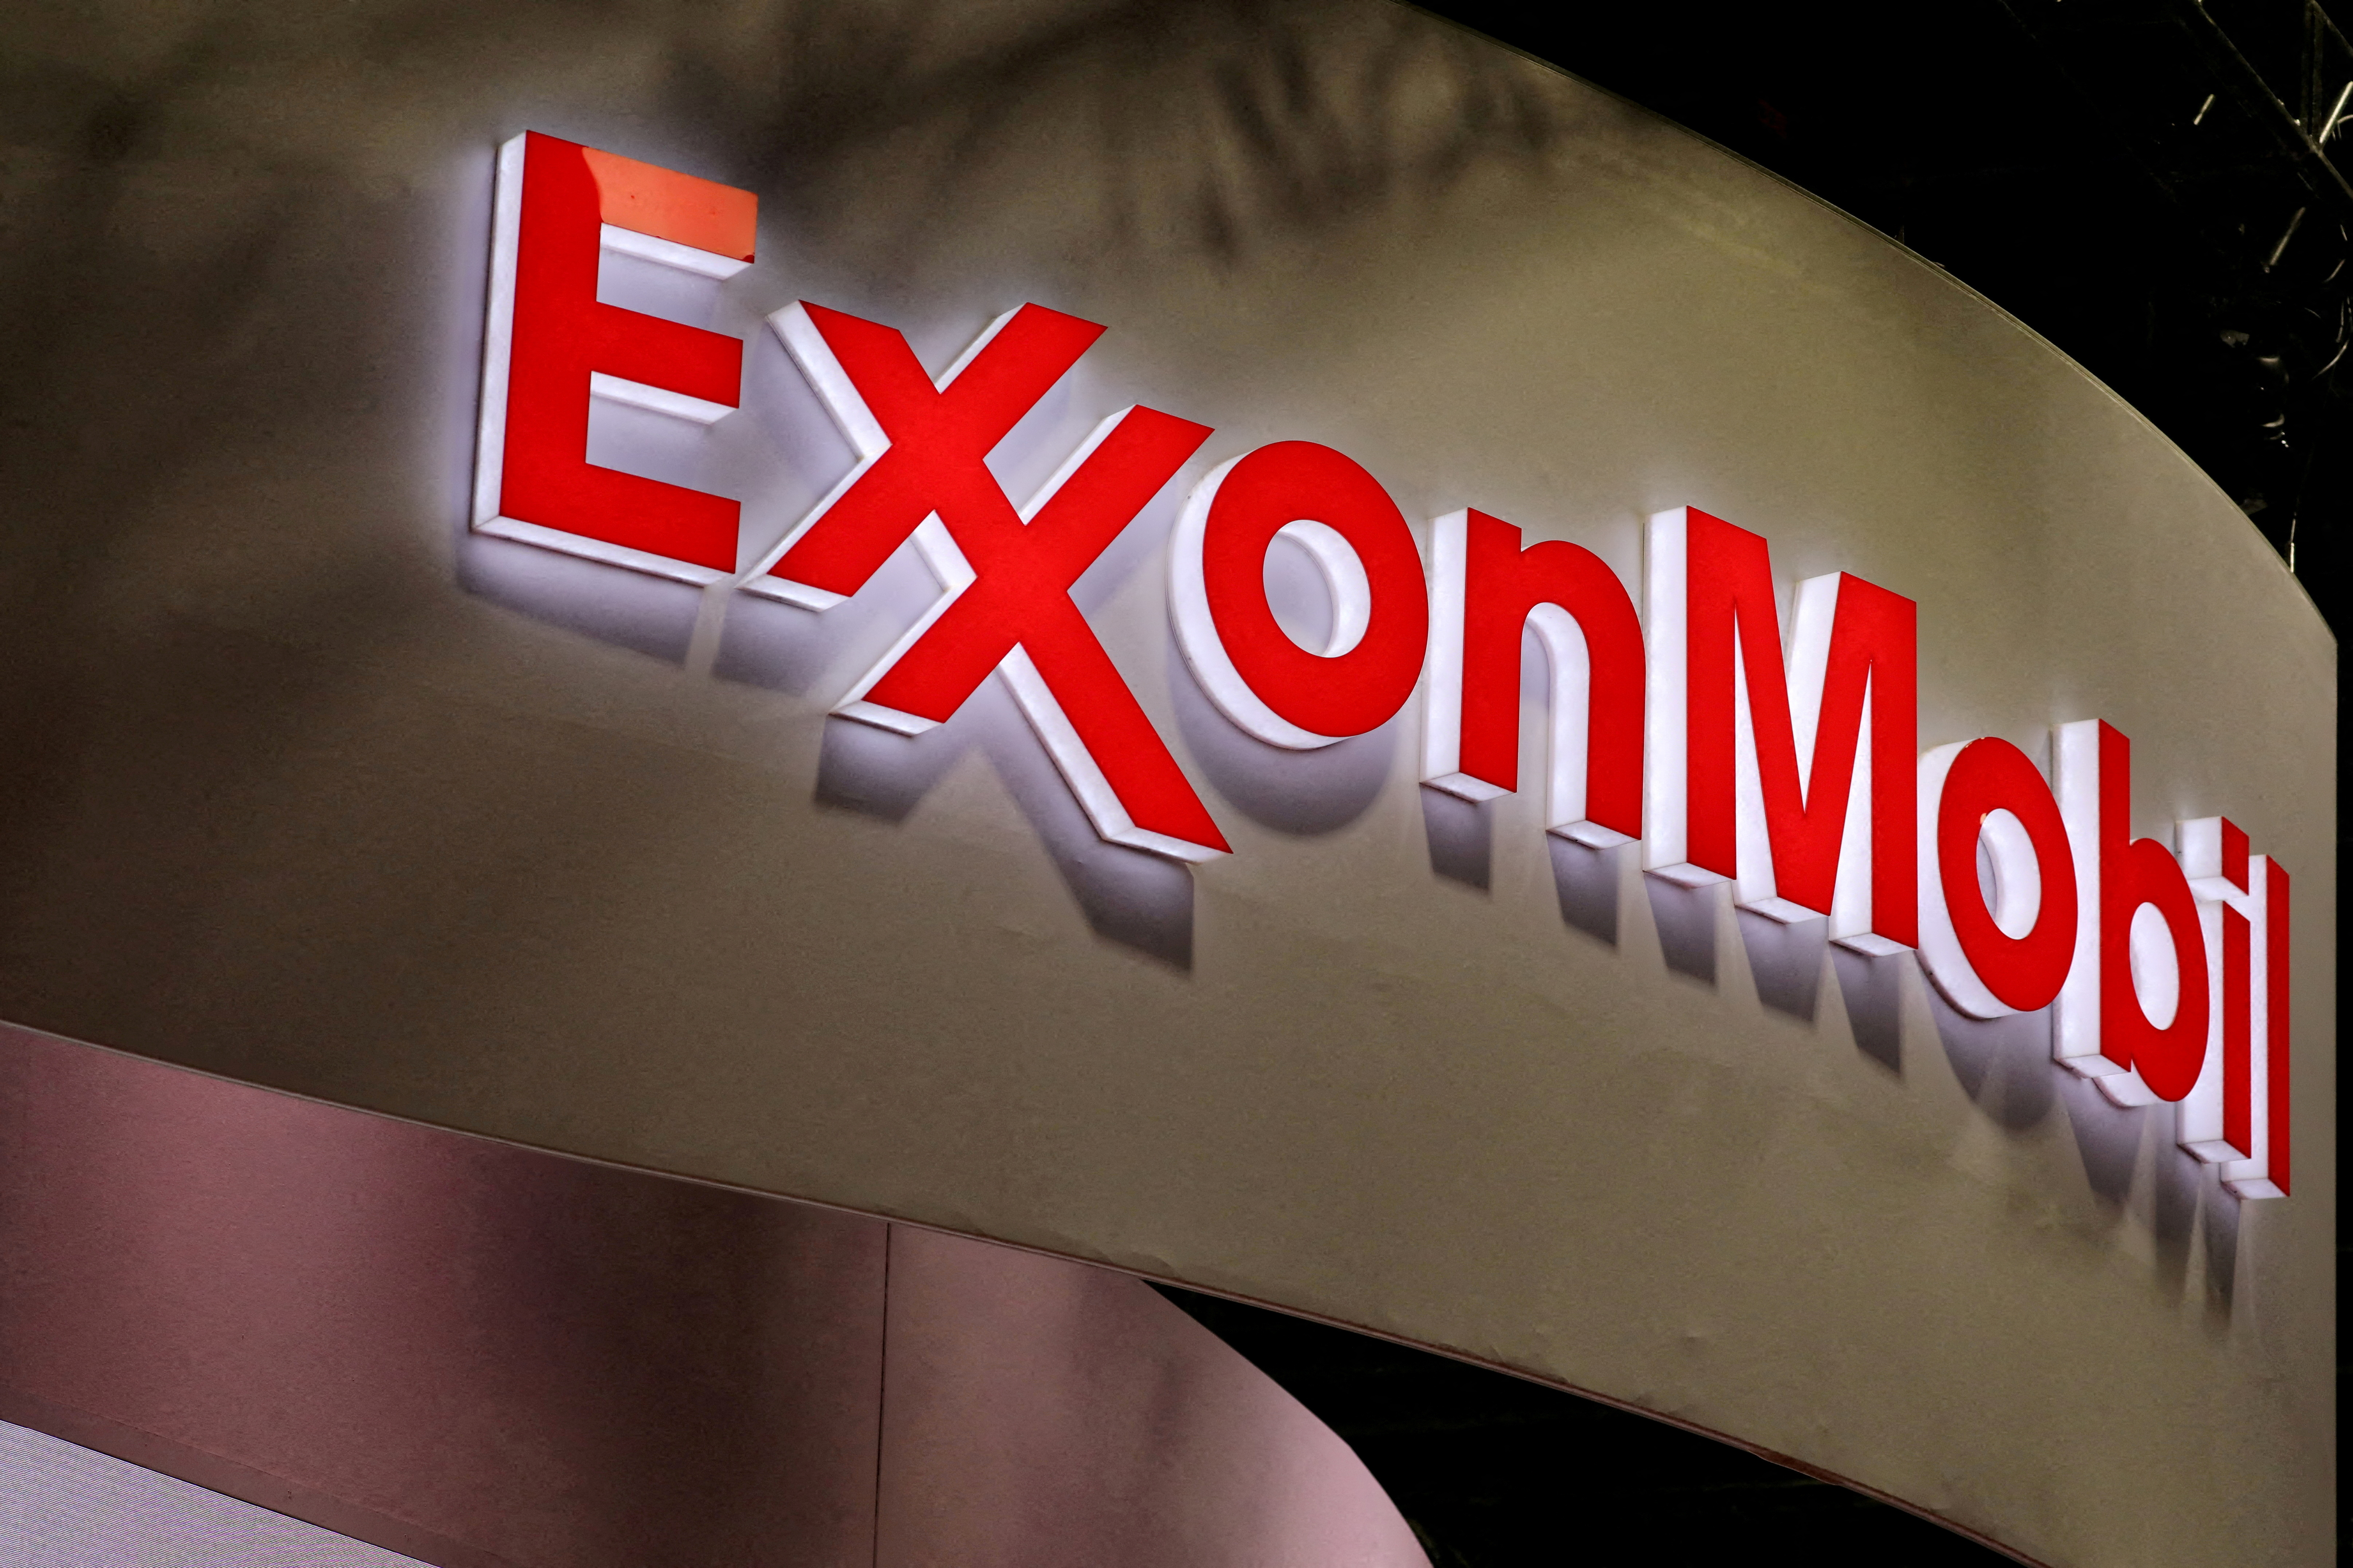 The logo of ExxonMobil is seen during the LNG 2023 energy trade show in Vancouver